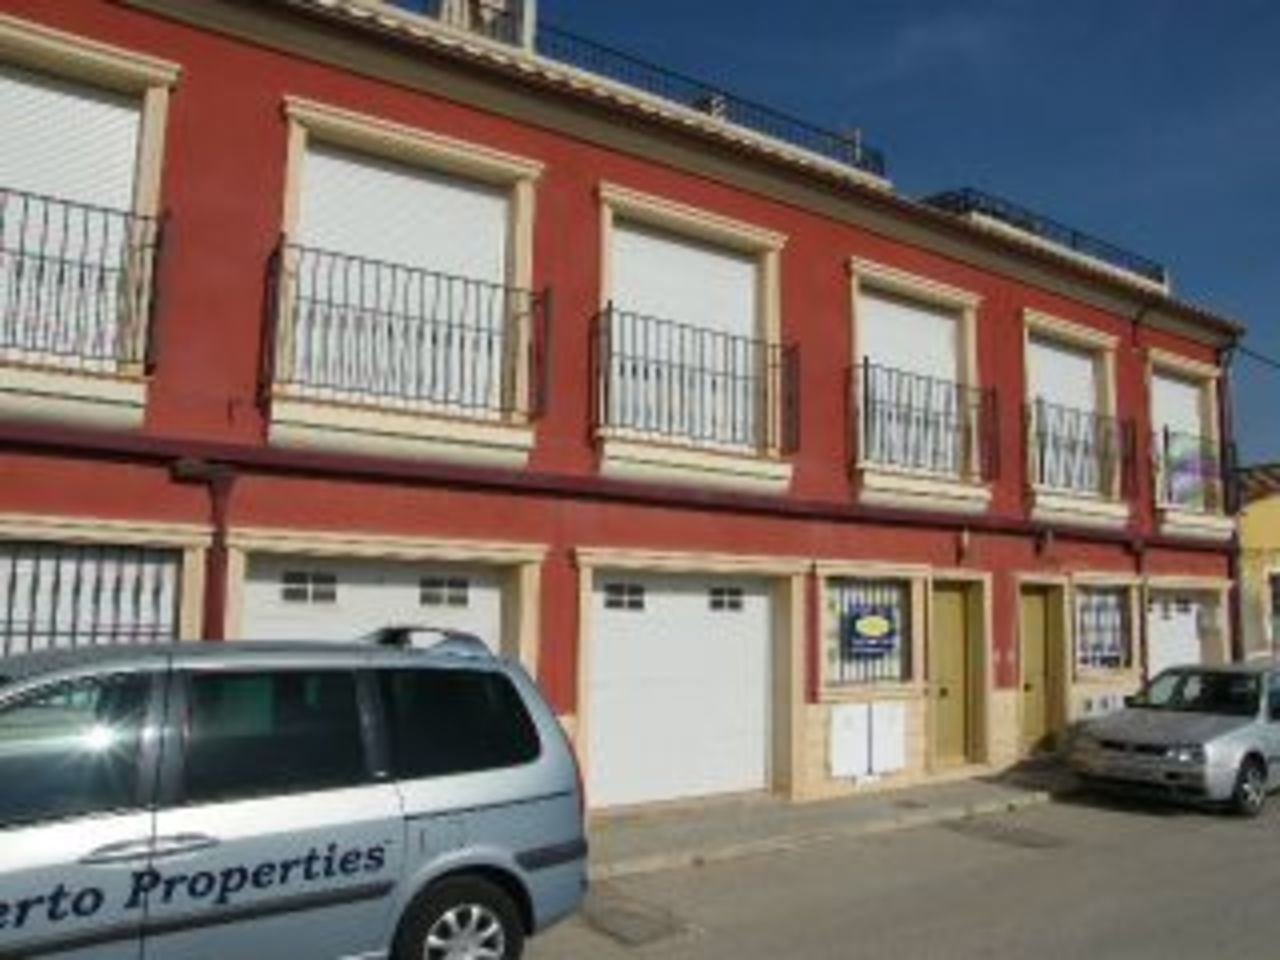 For sale: 3 bedroom house / villa in Catral